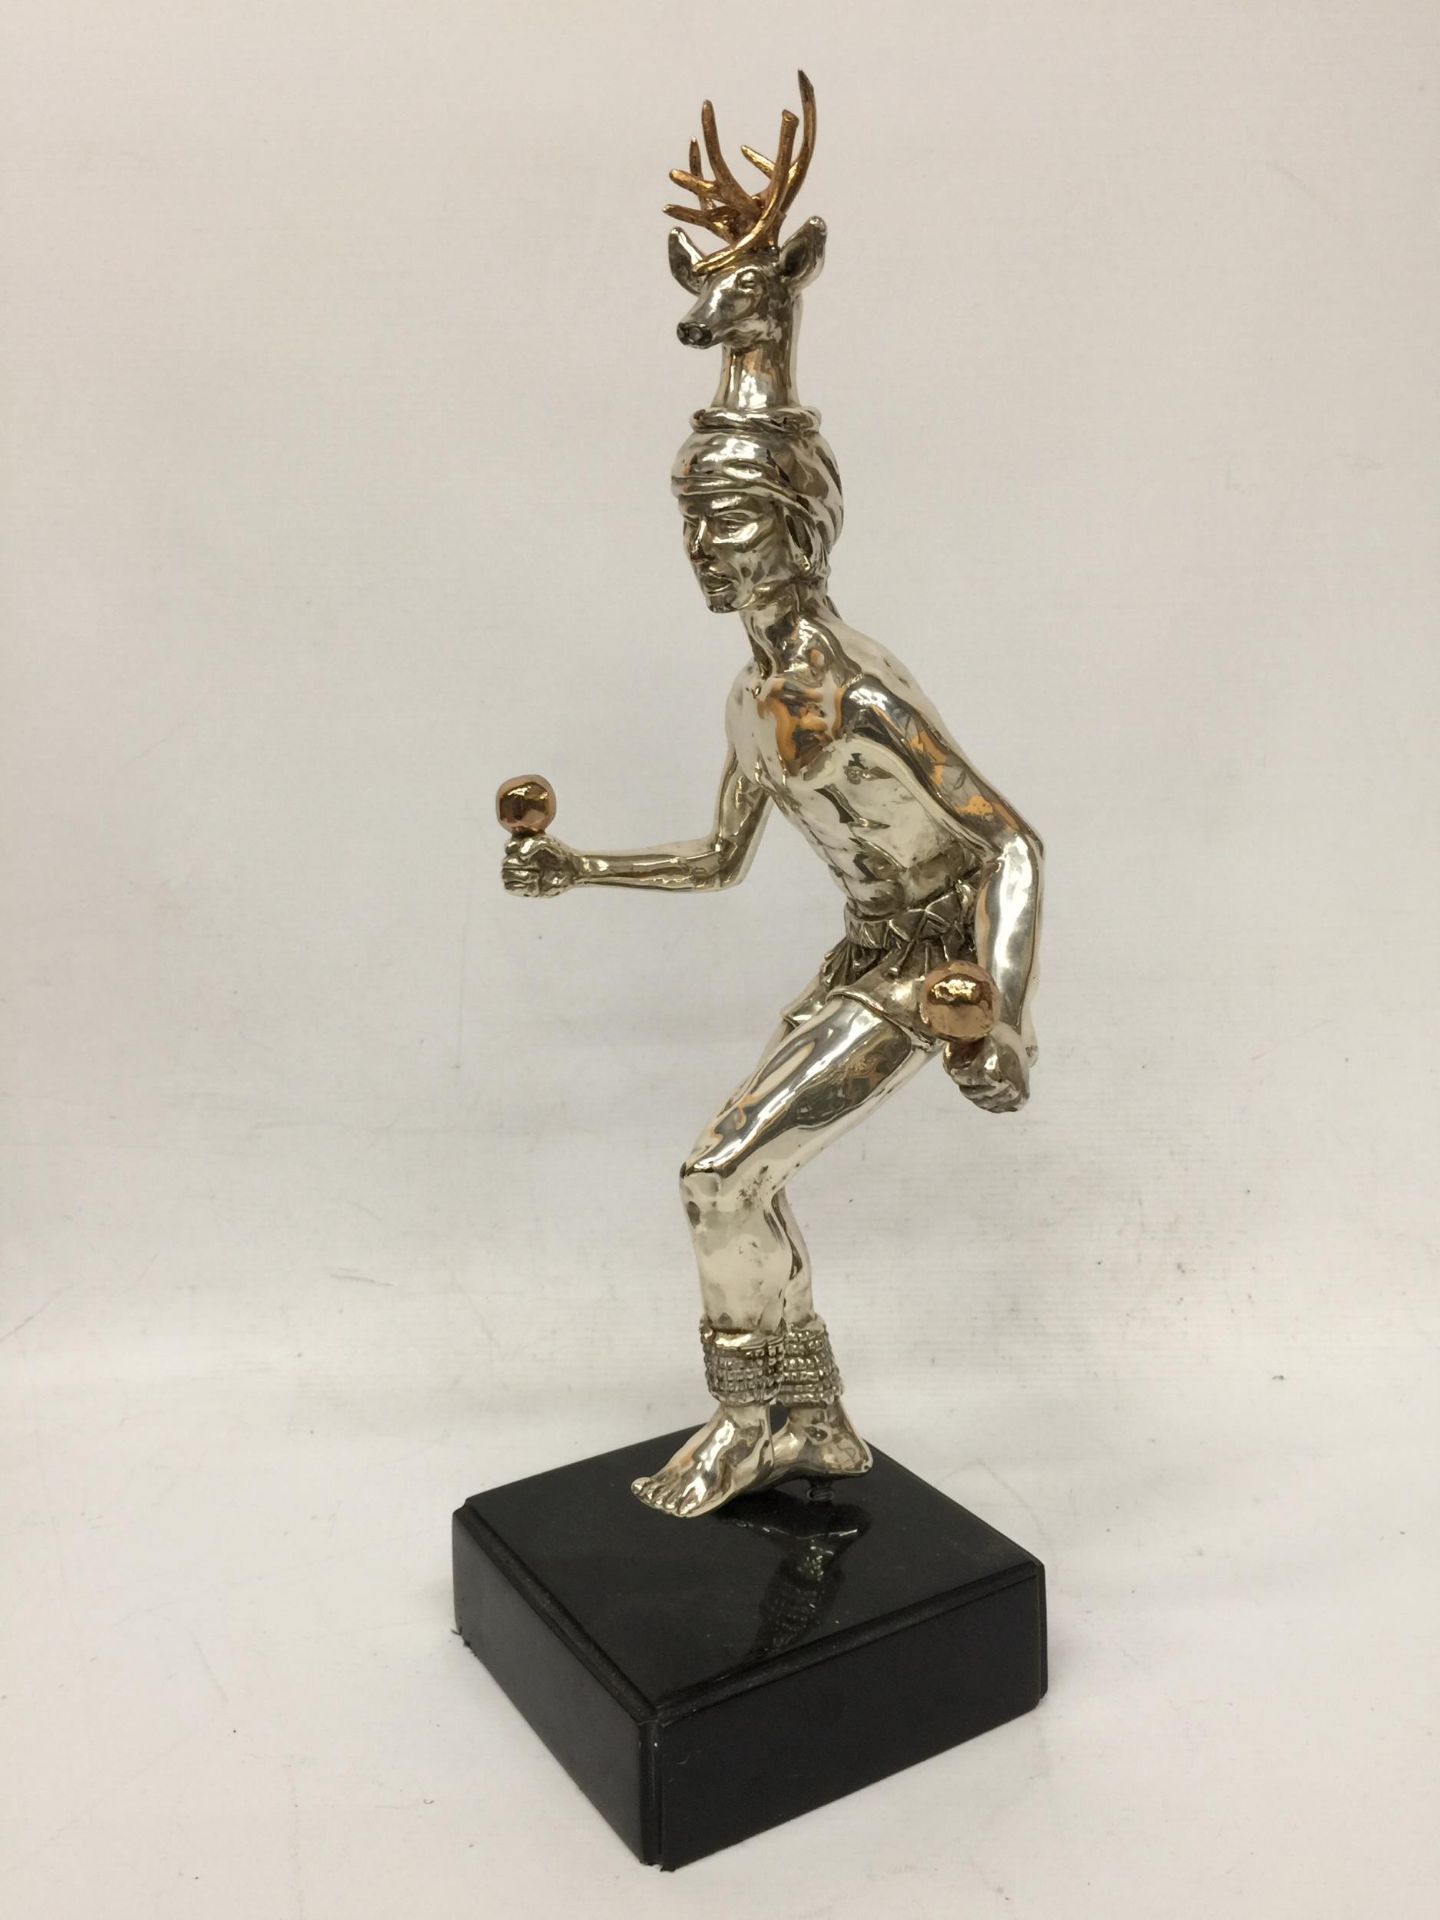 AN UNUSUAL WHITE METAL FIGURE ON BASE, SIGNED FEDERI CARLON?, NUMBERED 271/500 - Image 2 of 5